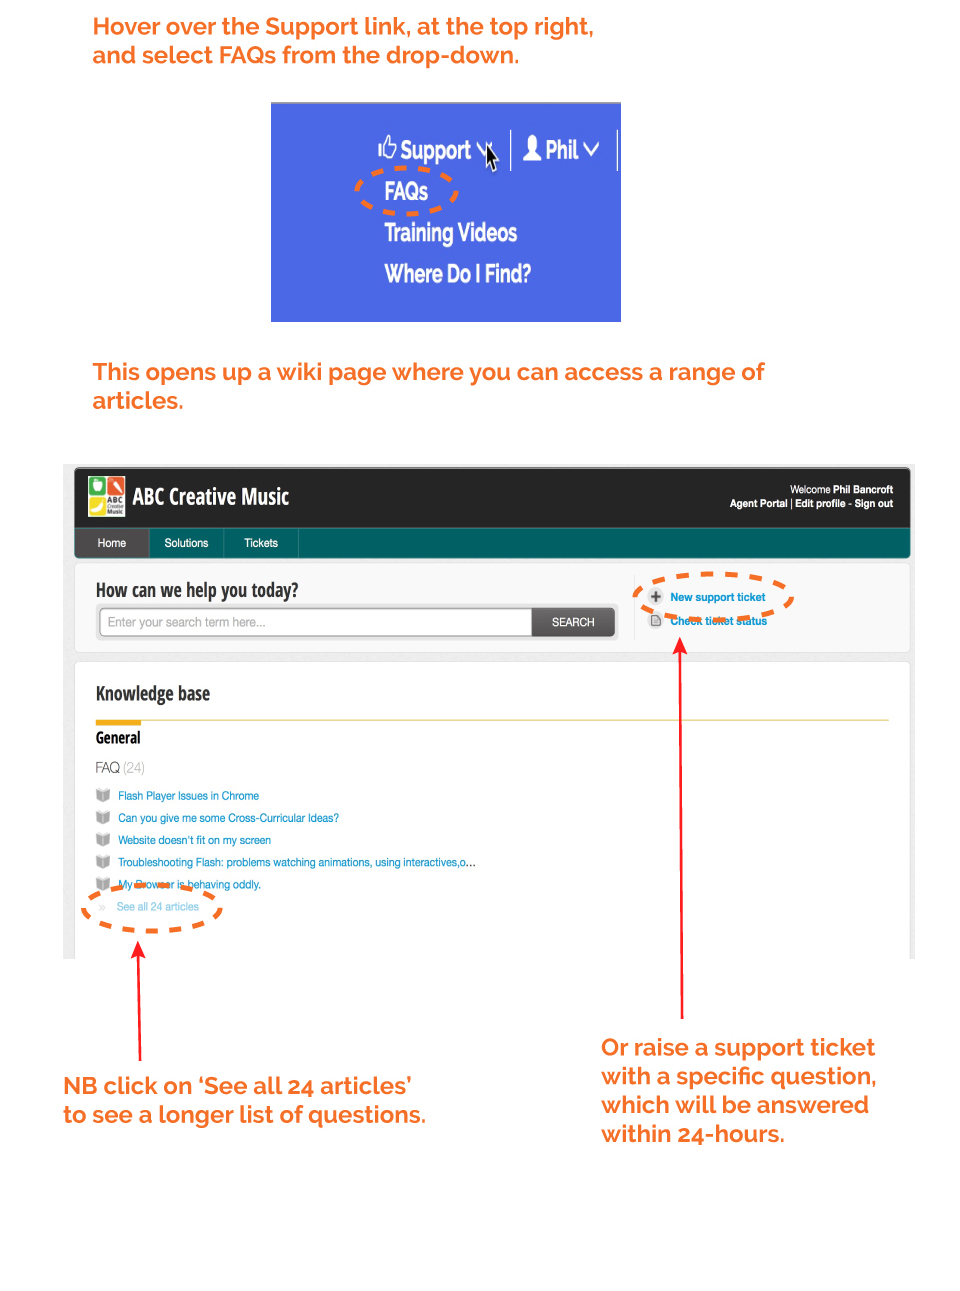 Graphic explaining where to find FAQs and raise a support ticket